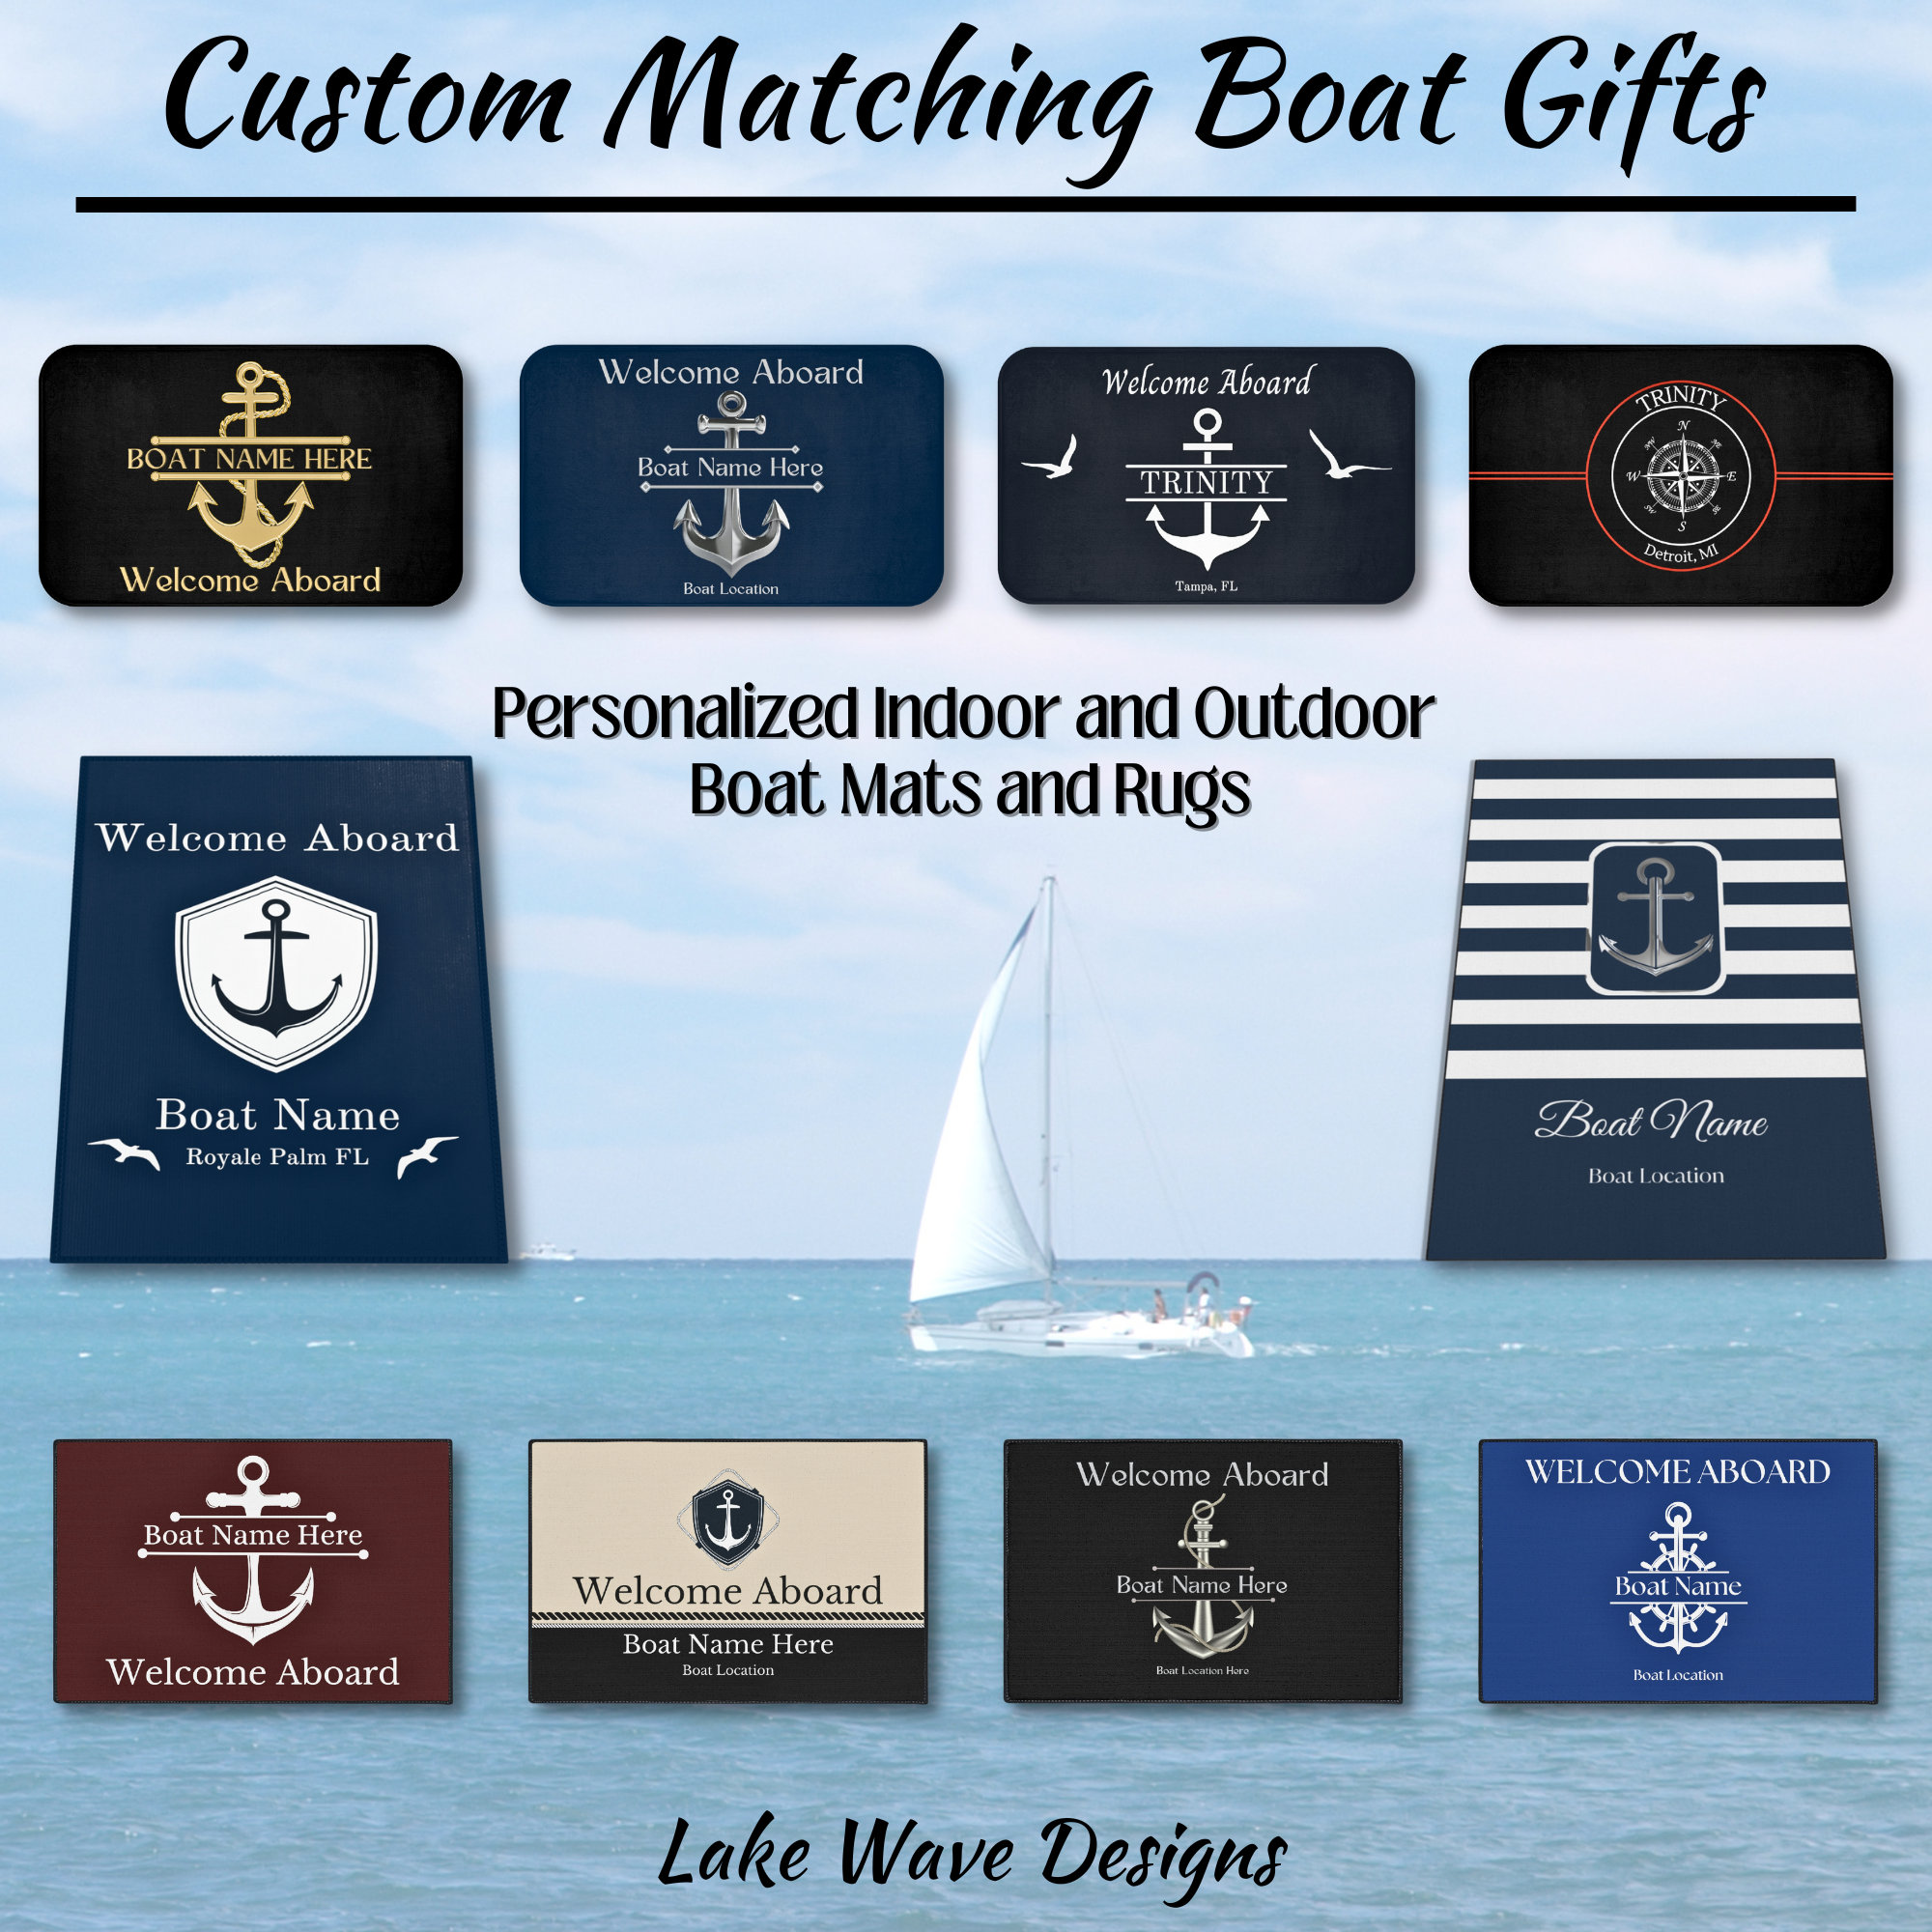 Custom Boat Mat, Boat Gifts Personalized, Boat Accessories, Nautical Gifts,  Boat Owner, Yacht Gift, Sailing Gift, Boat Decor, Welcome Aboard -   Canada